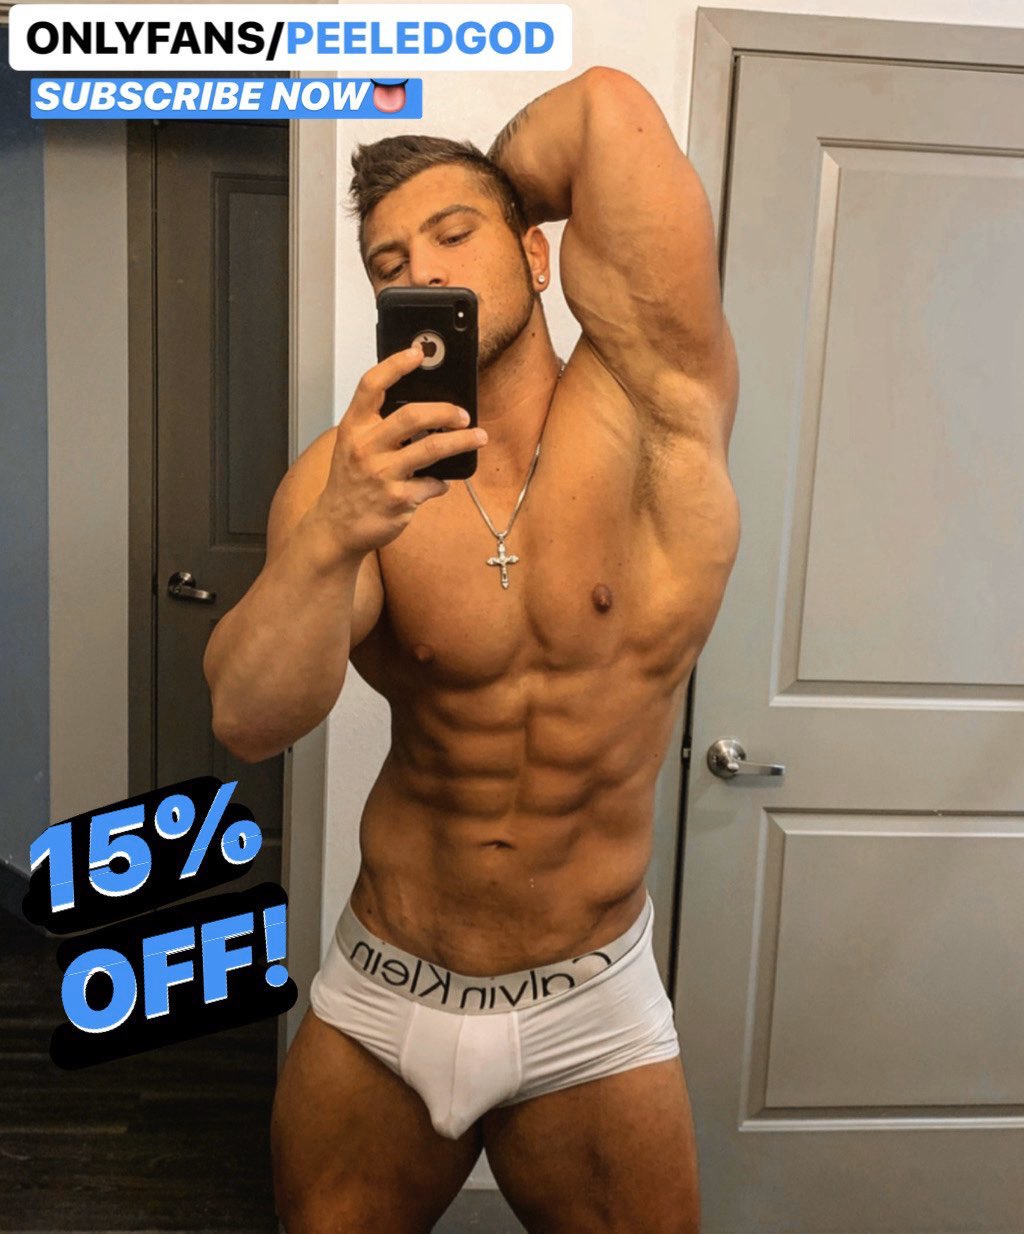 Best onlyfans page